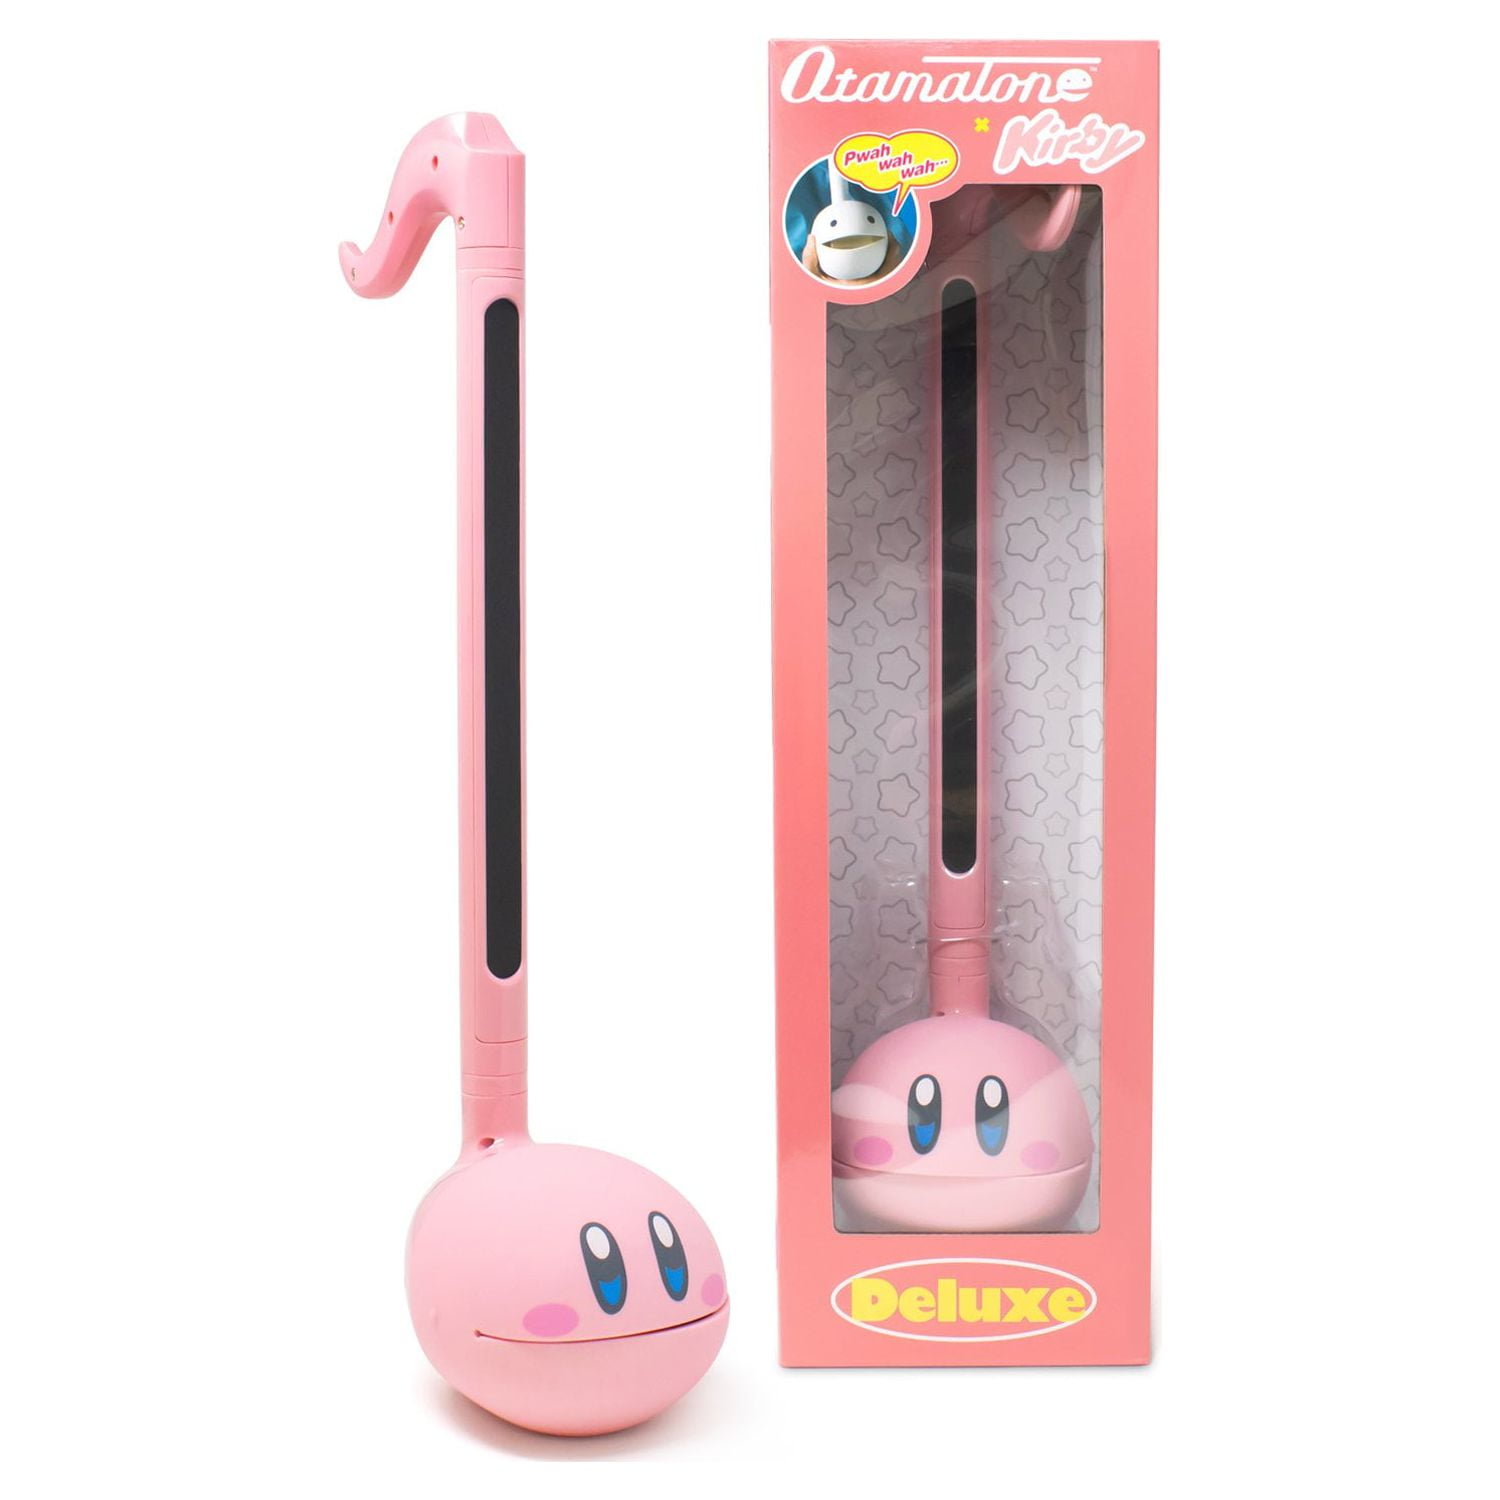 Otamatone Kirby Fun Japanese Electronic Musical Instrument Toy Synthesizer  Deluxe Size for Children and Adults